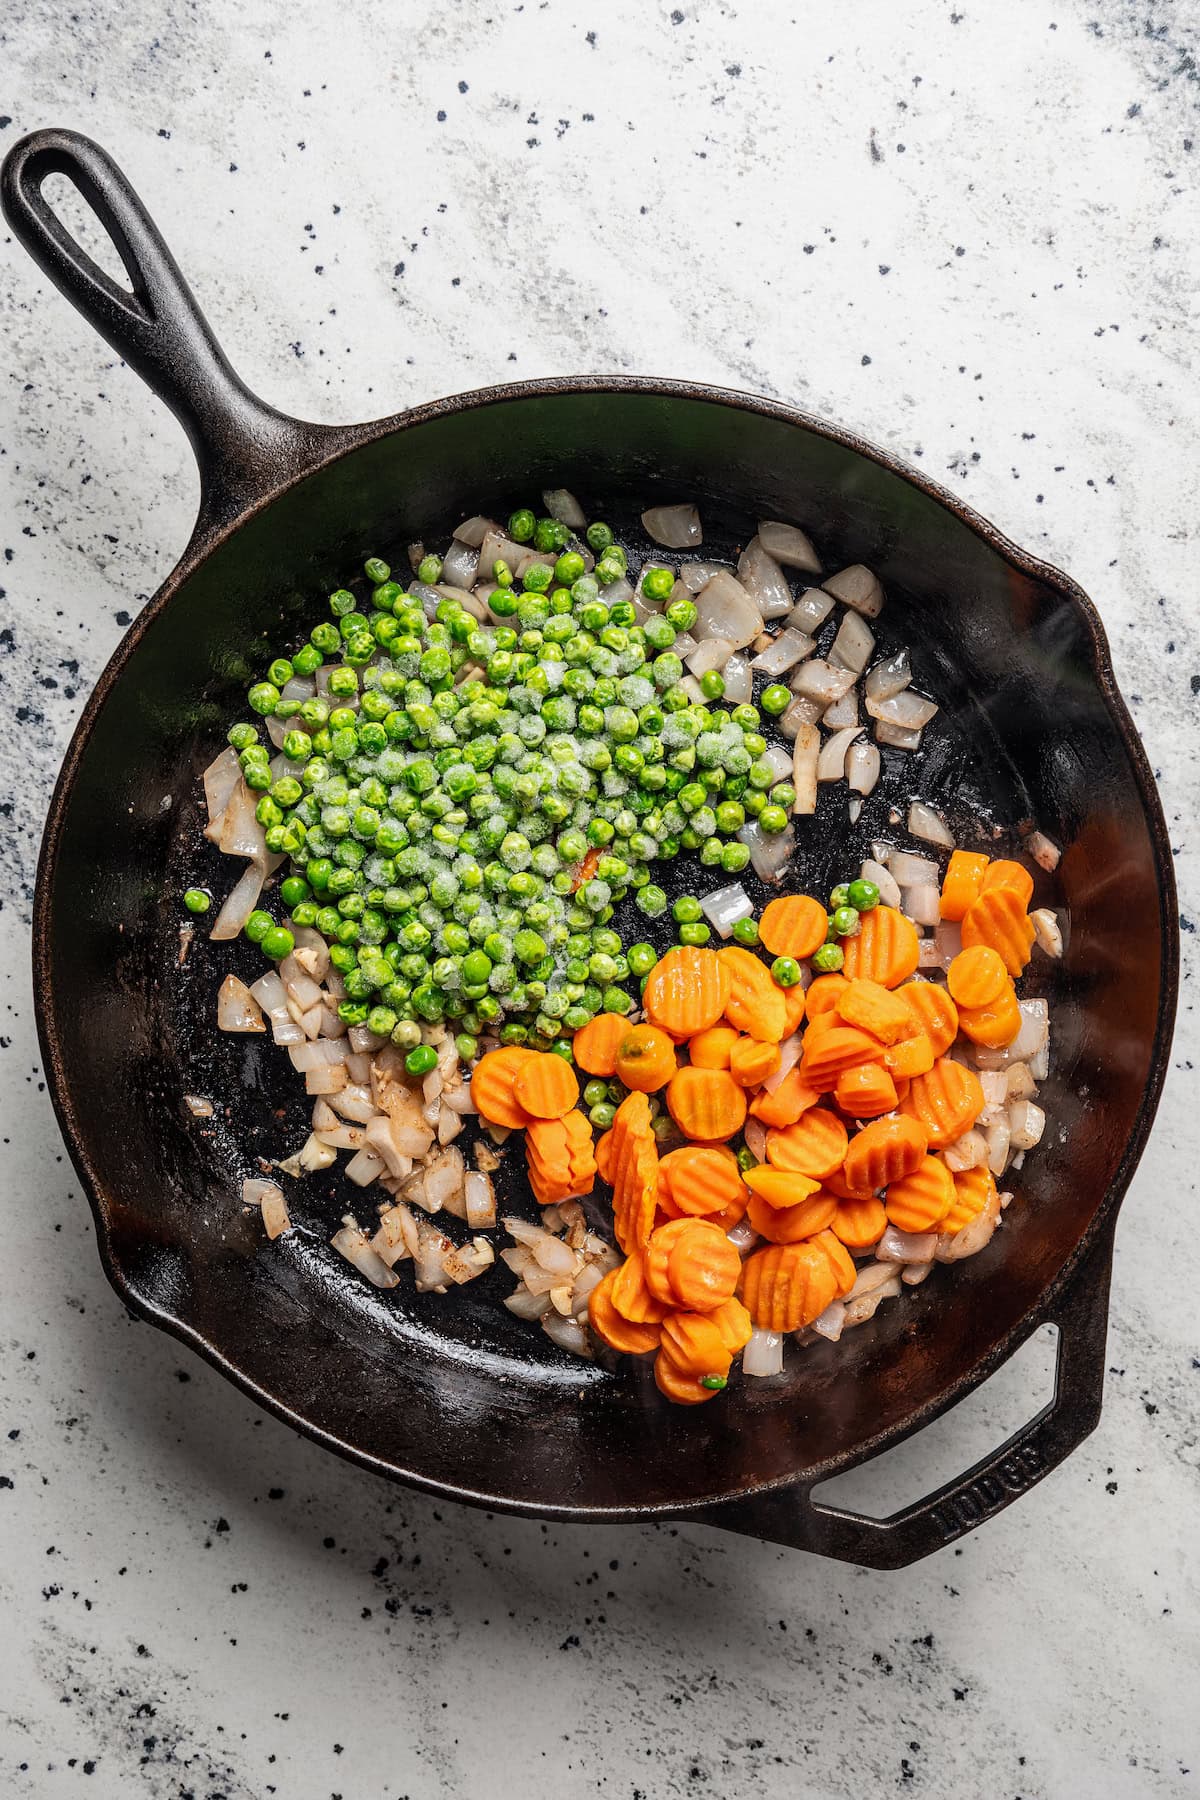 Onions, frozen peas, and carrots added to a skillet.